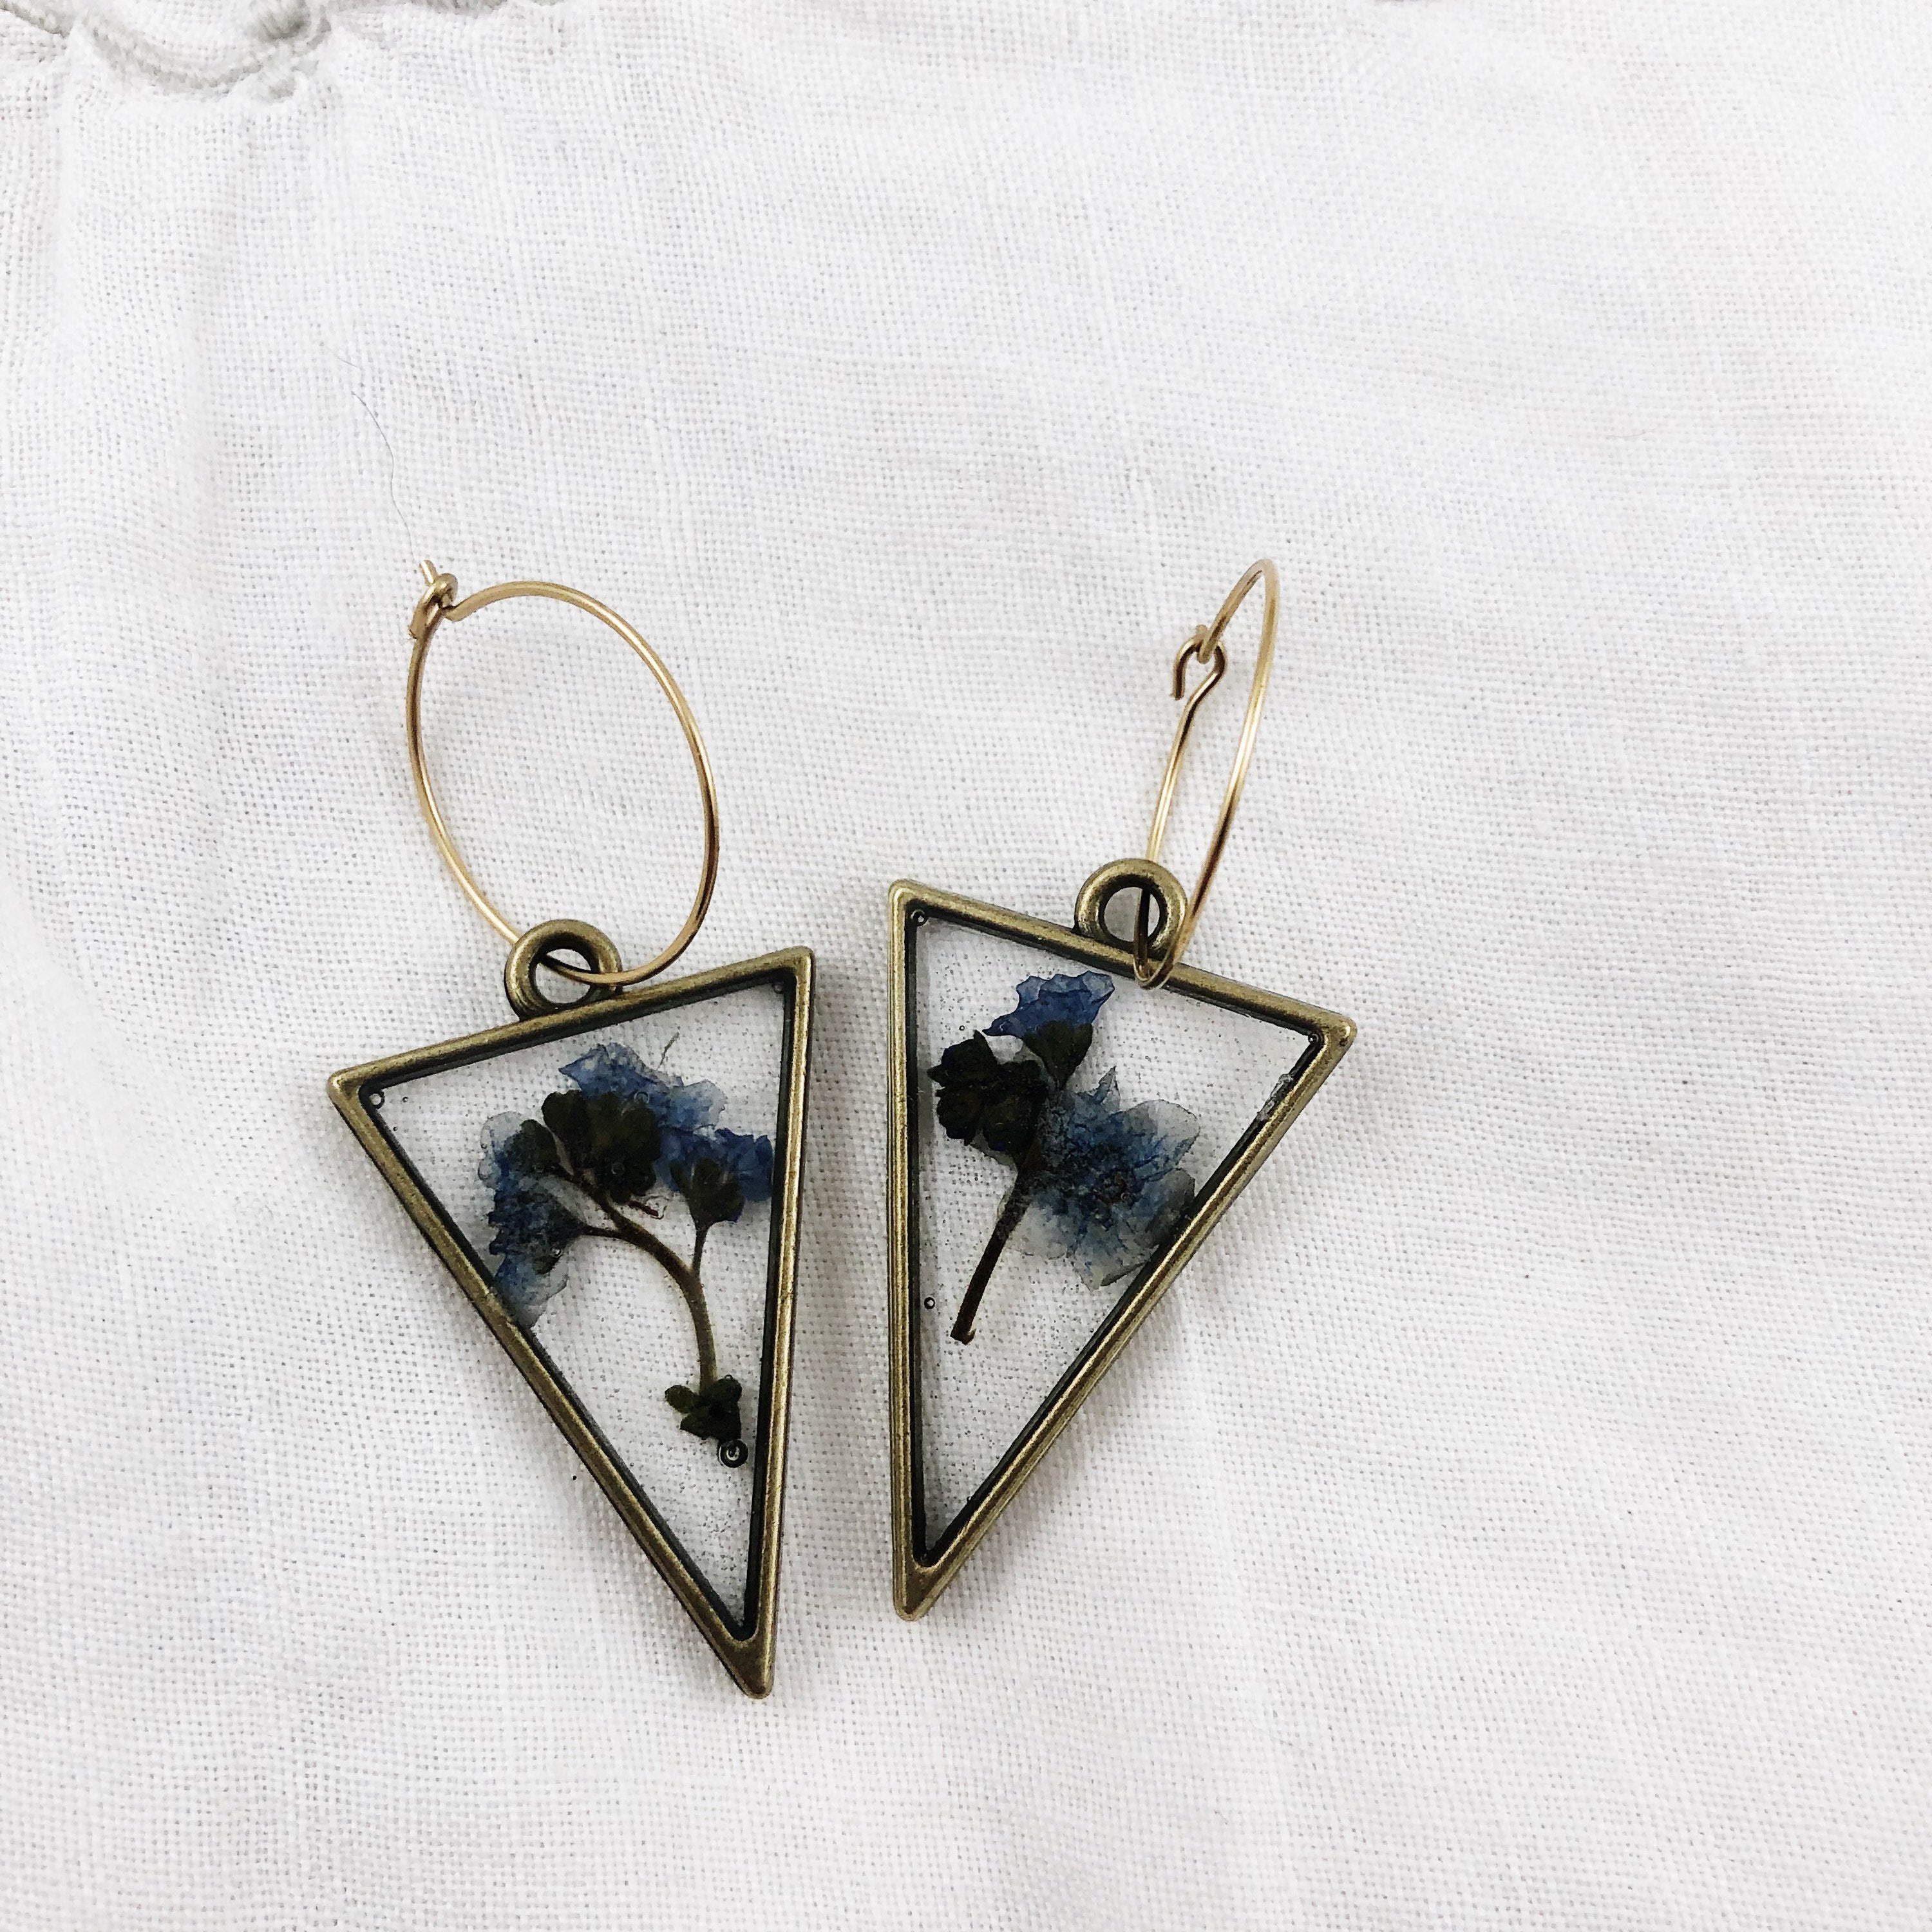 Everly - Brass Triangle Hoop Earrings with Forget Me Nots